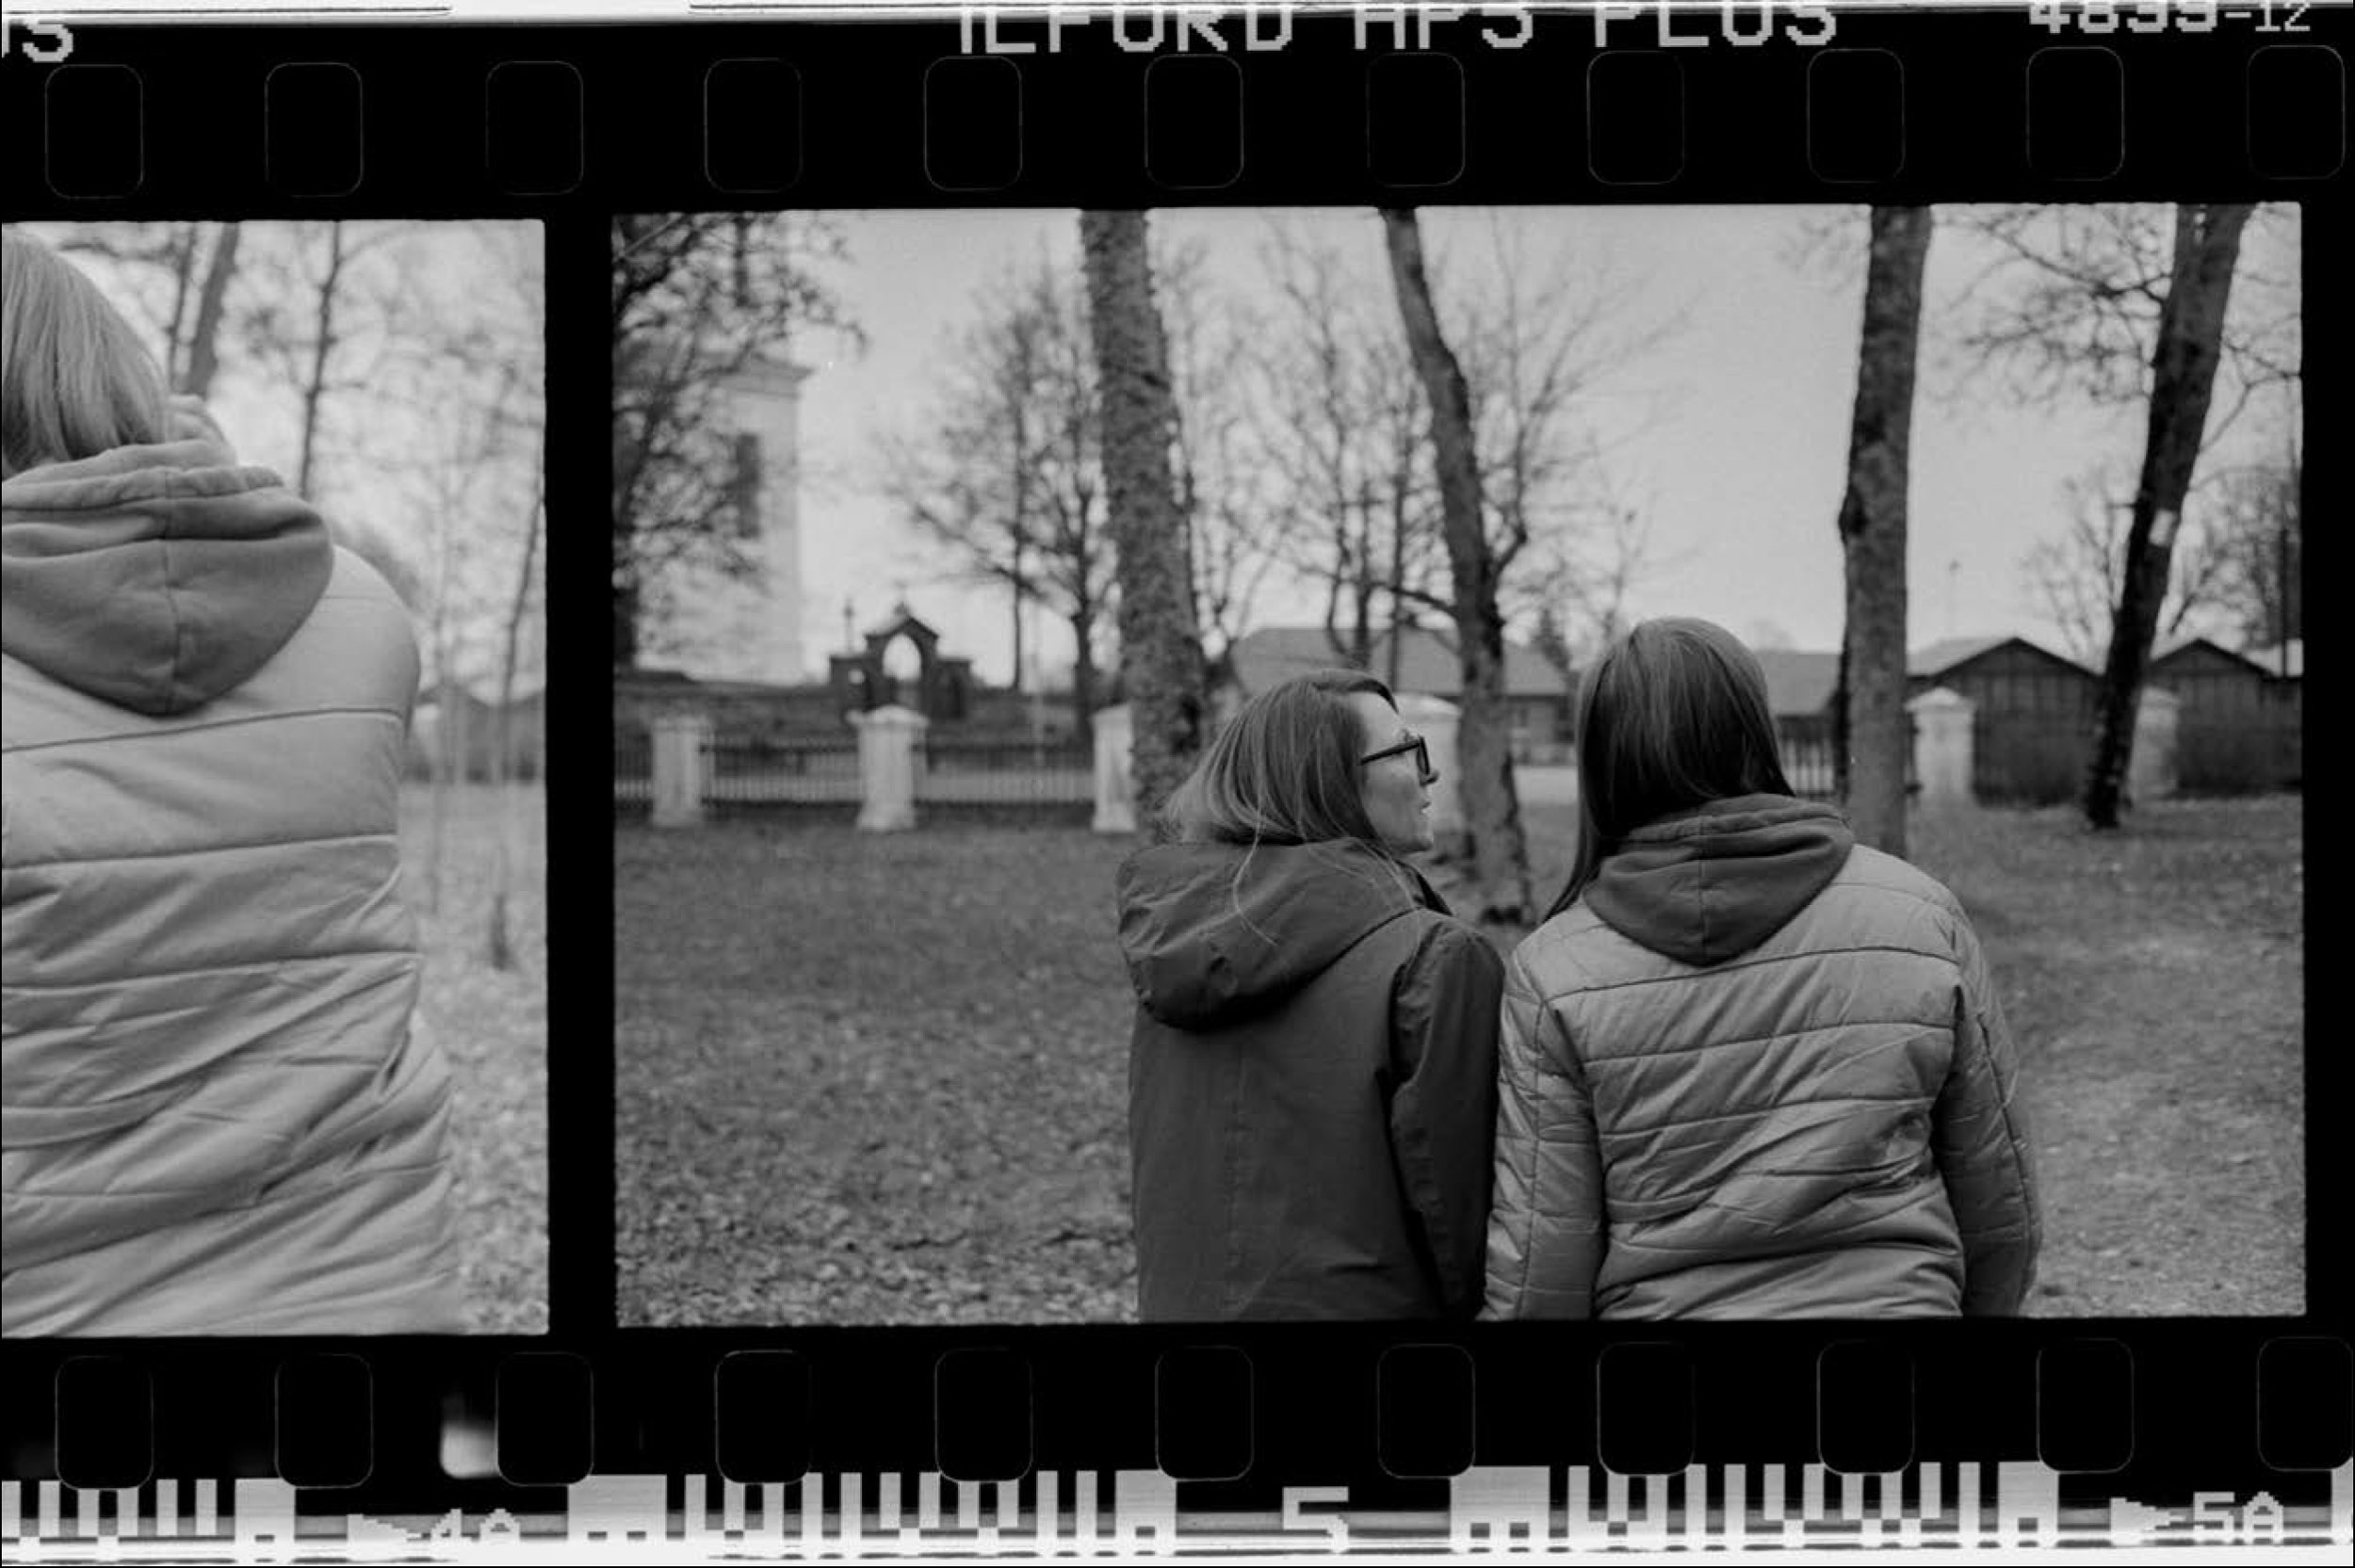 A black and white photograph shows the backs of two women as they walk towards a series of trees and small buildings in the distance. The photograph is a scan from the analogue film and details of the film can be seen at the top and bottom of the image, including the words Ilford HP5 Plus at the top and a series of light grey graphic shapes at the bottom.